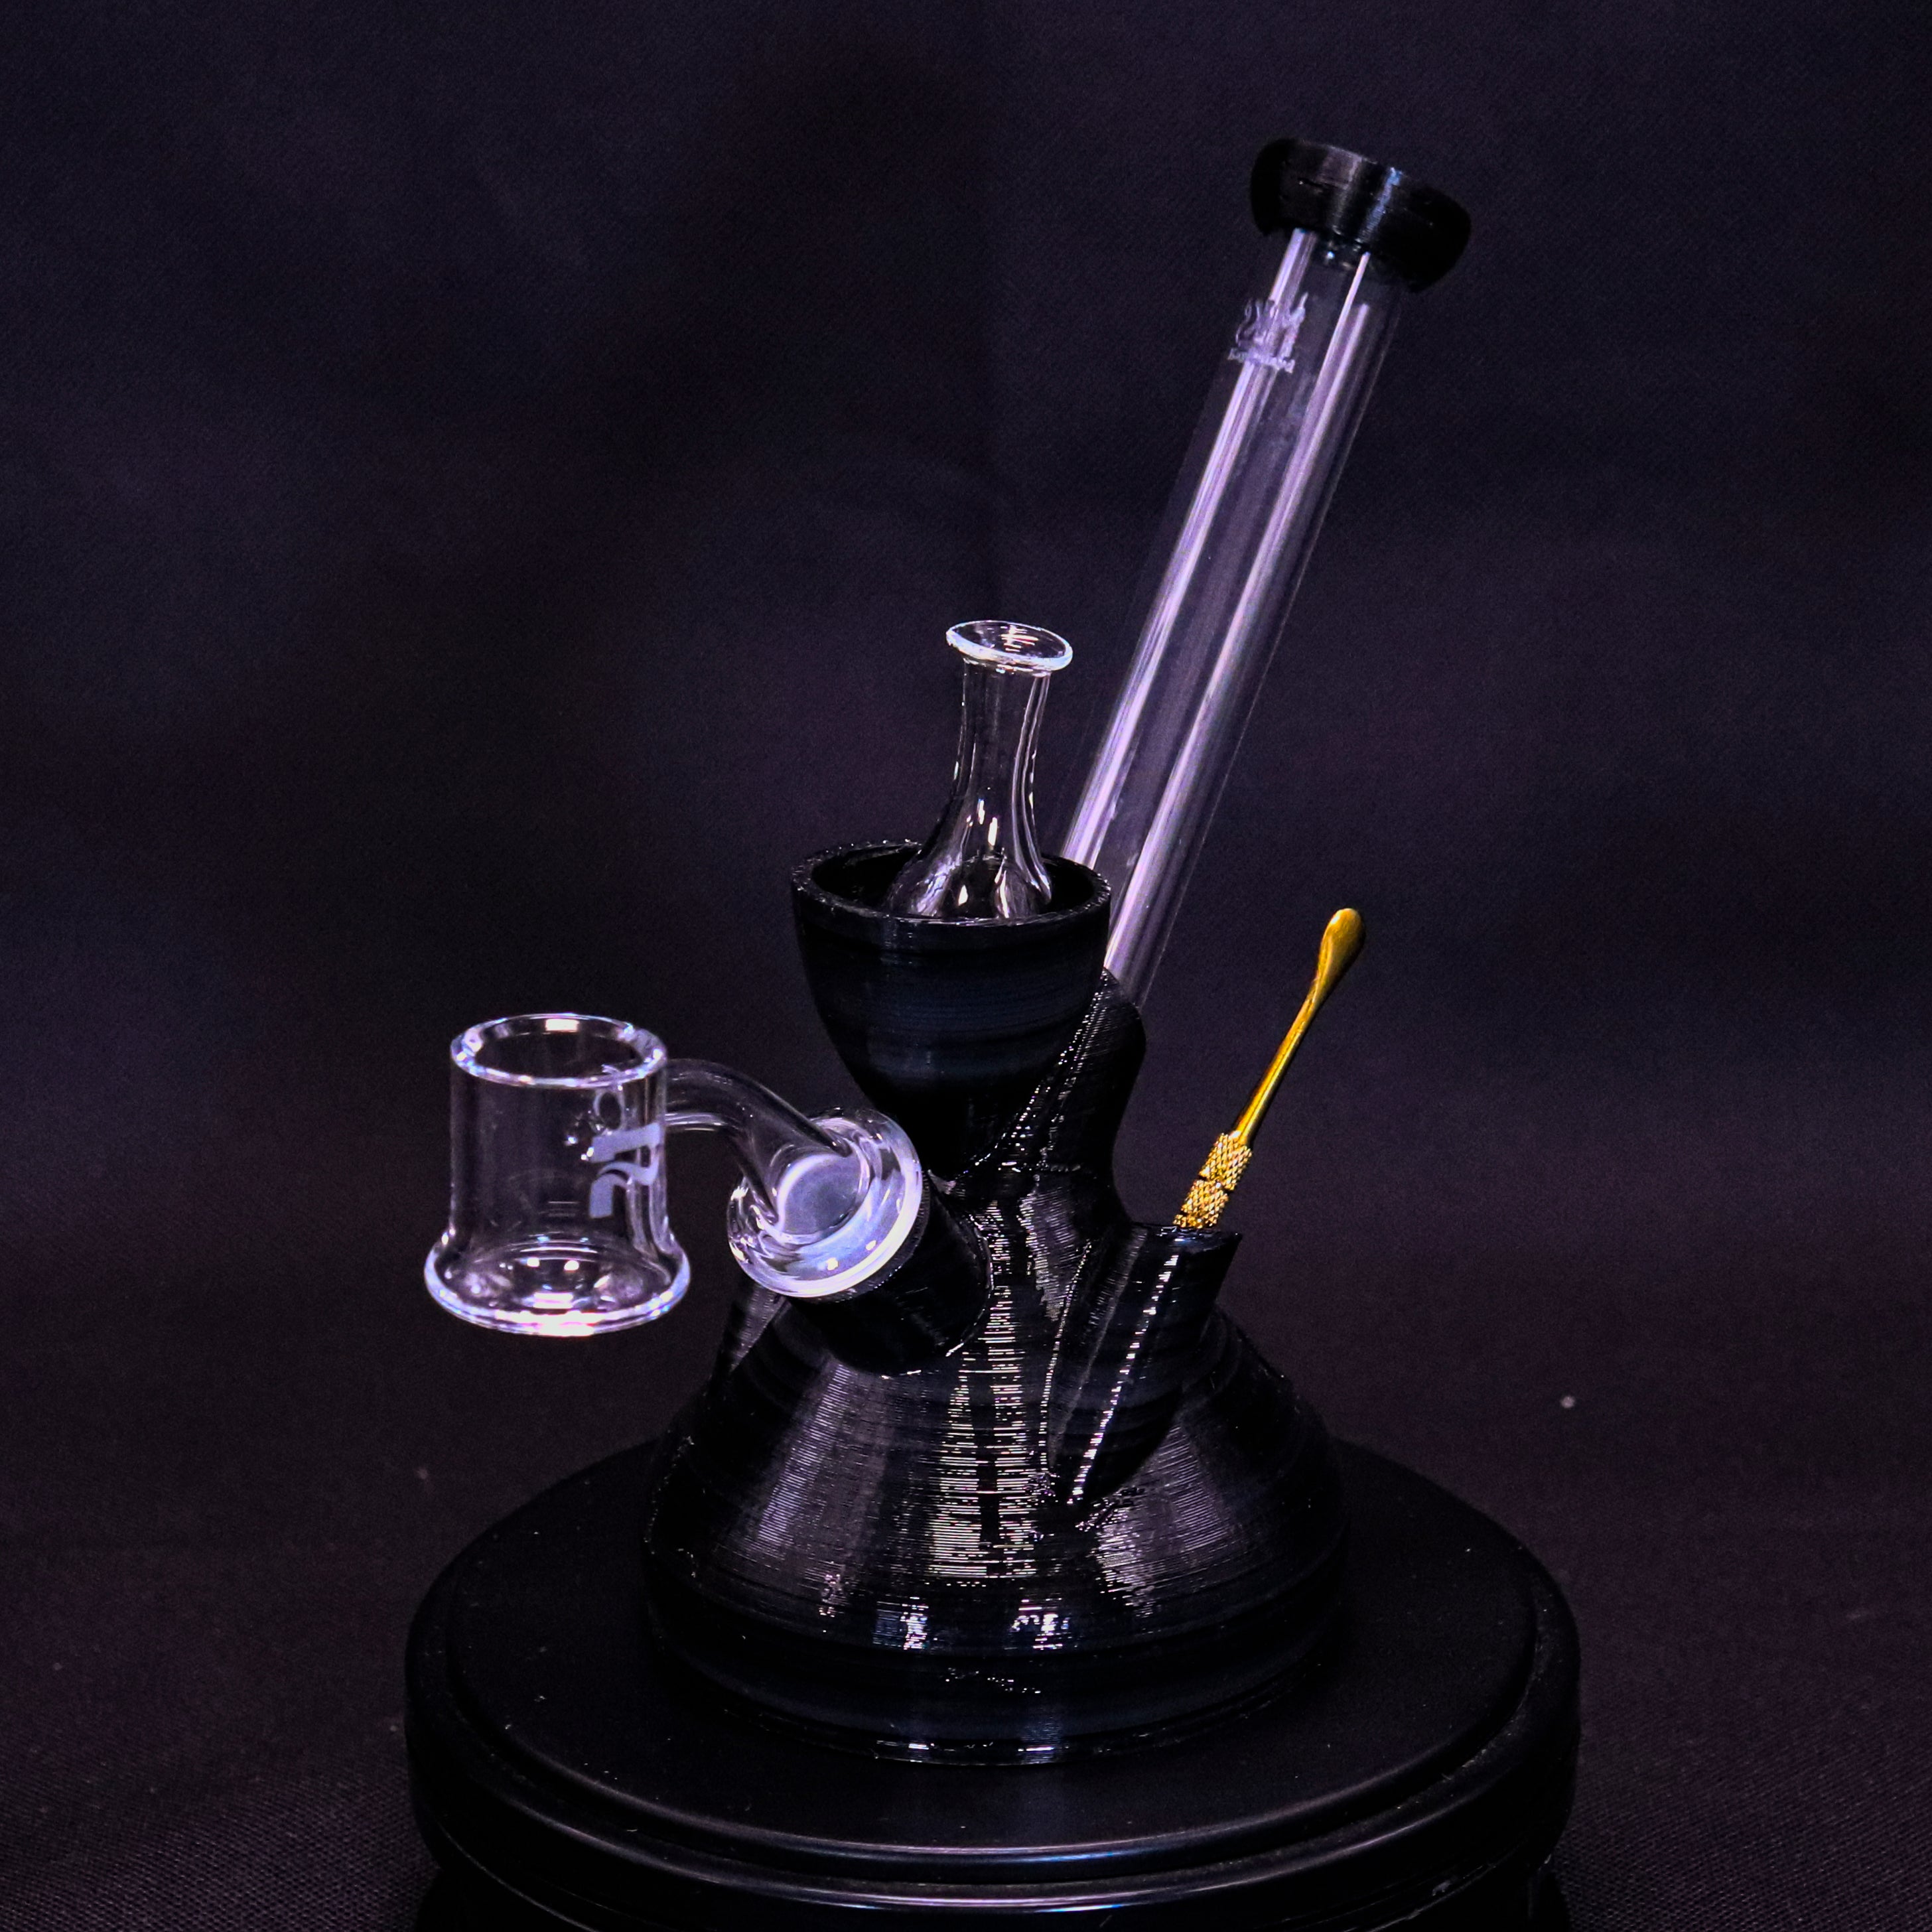 Black unbreakable shatterproof Dab Rig with quartz banger, dab tool and glass carb cap